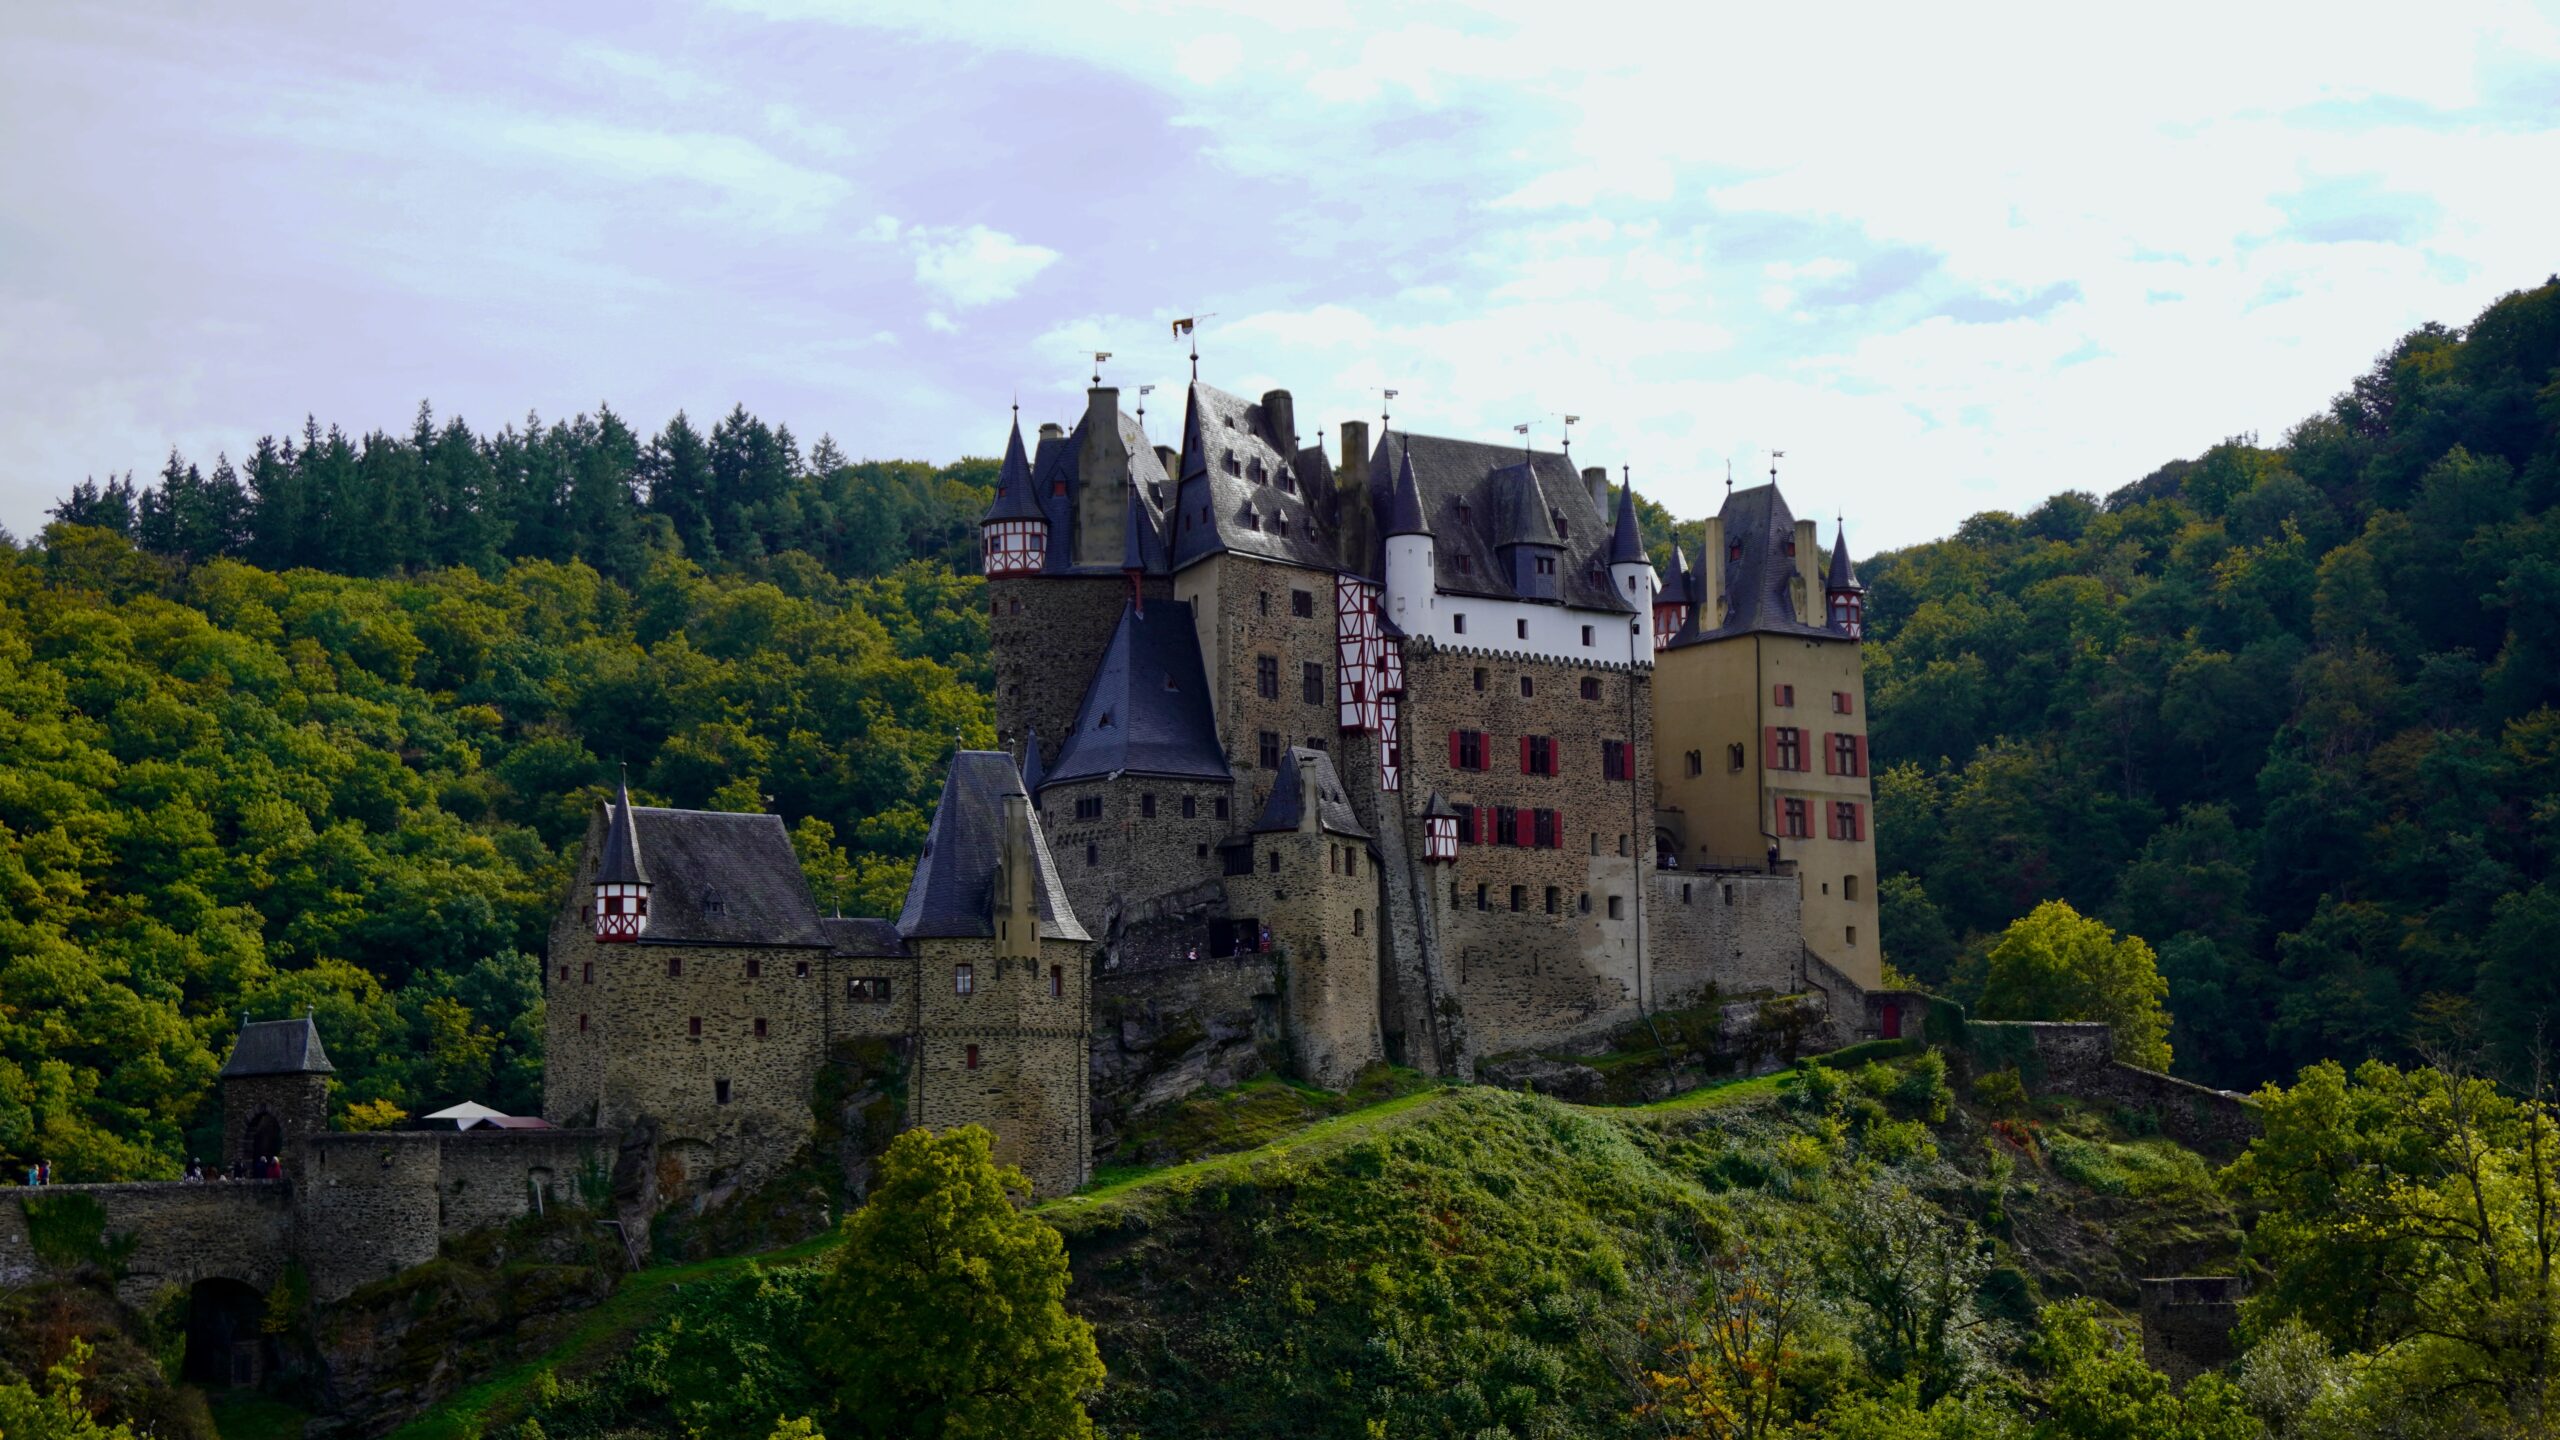 burg eltz castle with the forest and hill in the center with stone walls and some red and white timber rooms on top